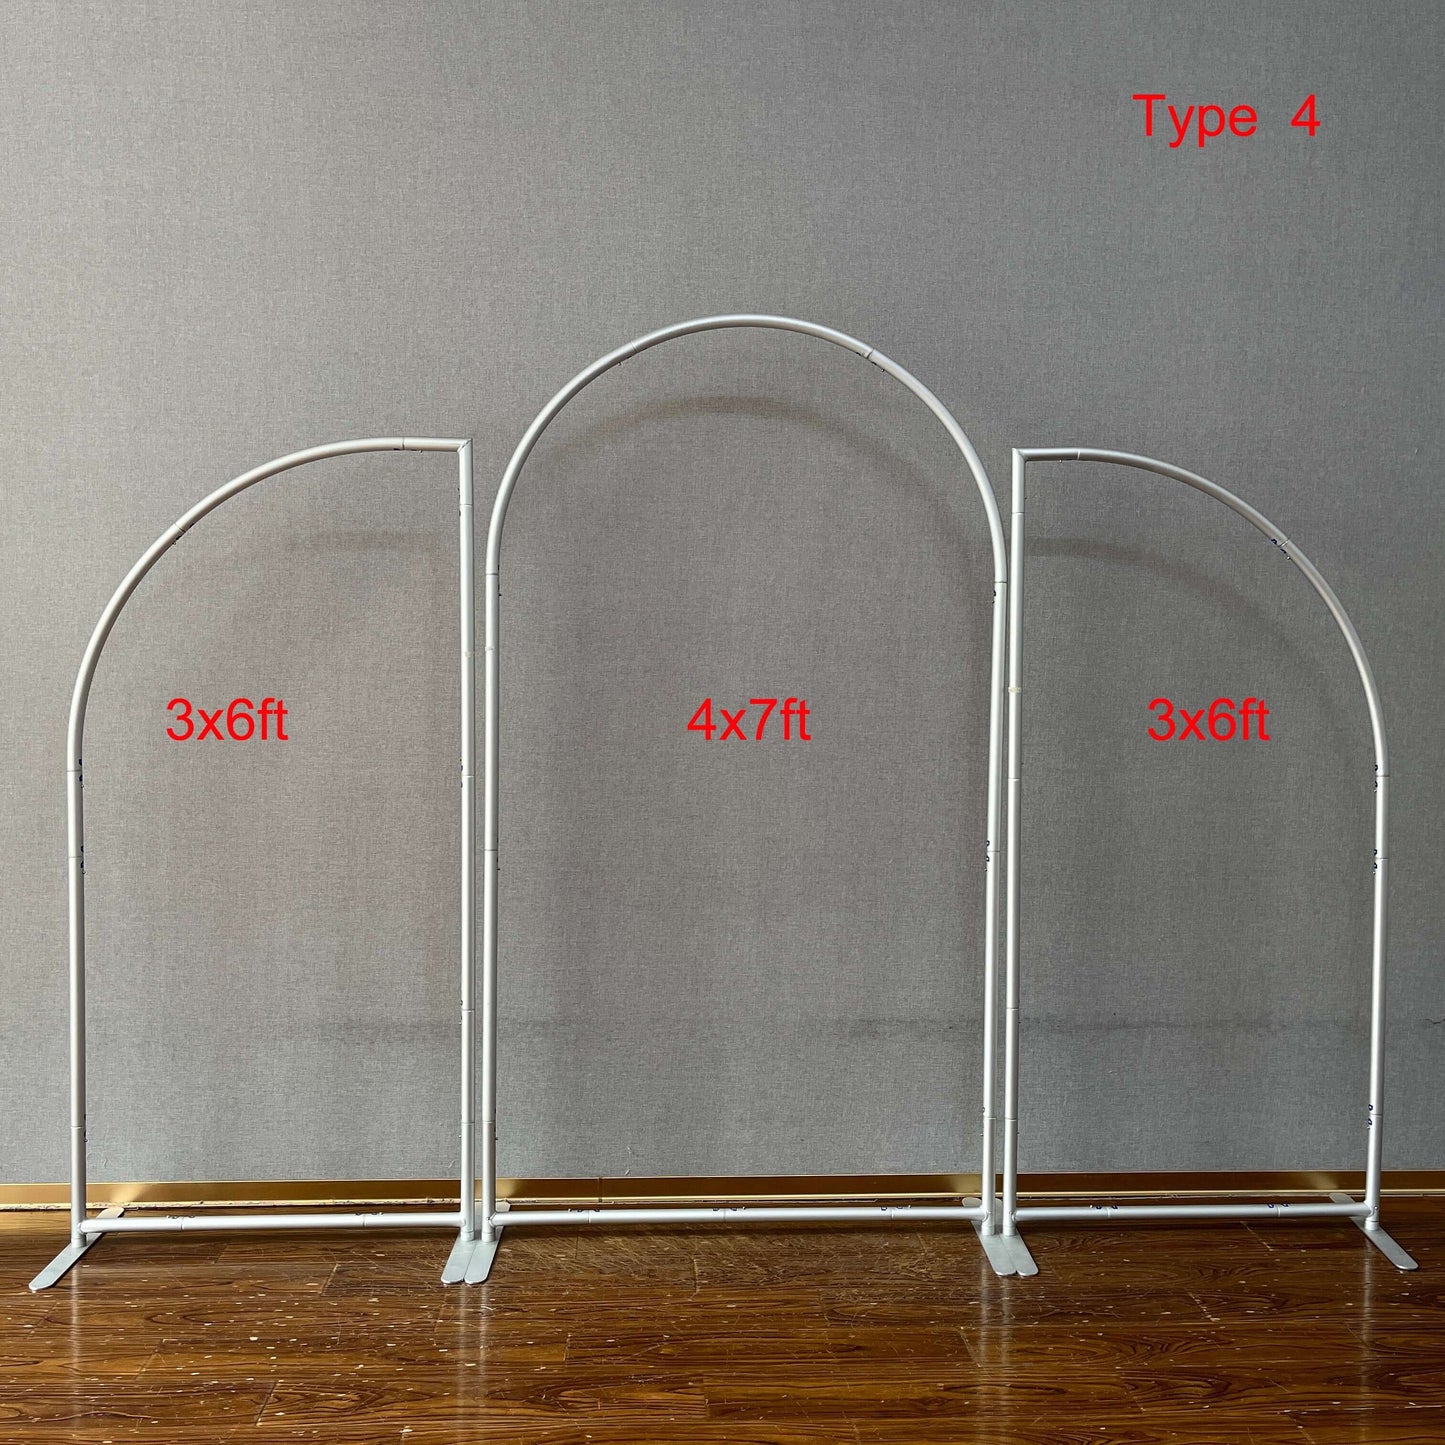 Chiara Arch Stand Frames 5X7Ft Open 3X4Ft 4X7Ft 3X6Ft+4X7Ft+3X6Ft Stands Feestachtergrond